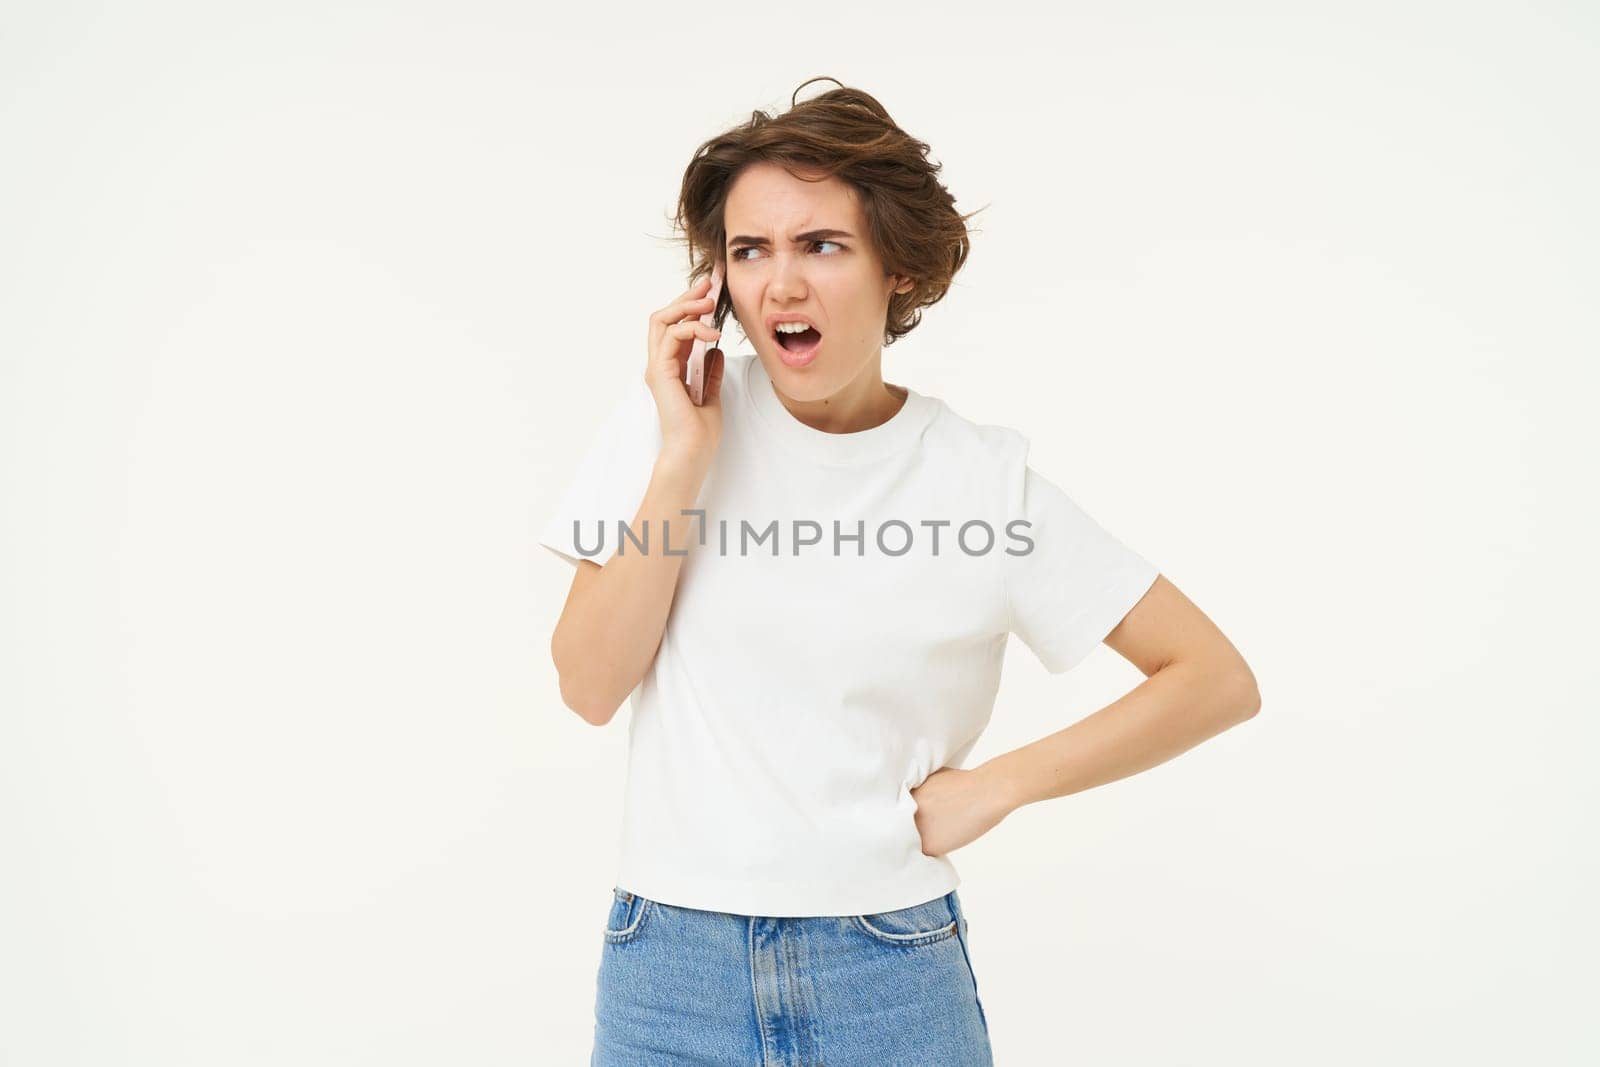 Annoyed girl arguing on mobile phone, talking, having an argument over the telephone, standing over white background.